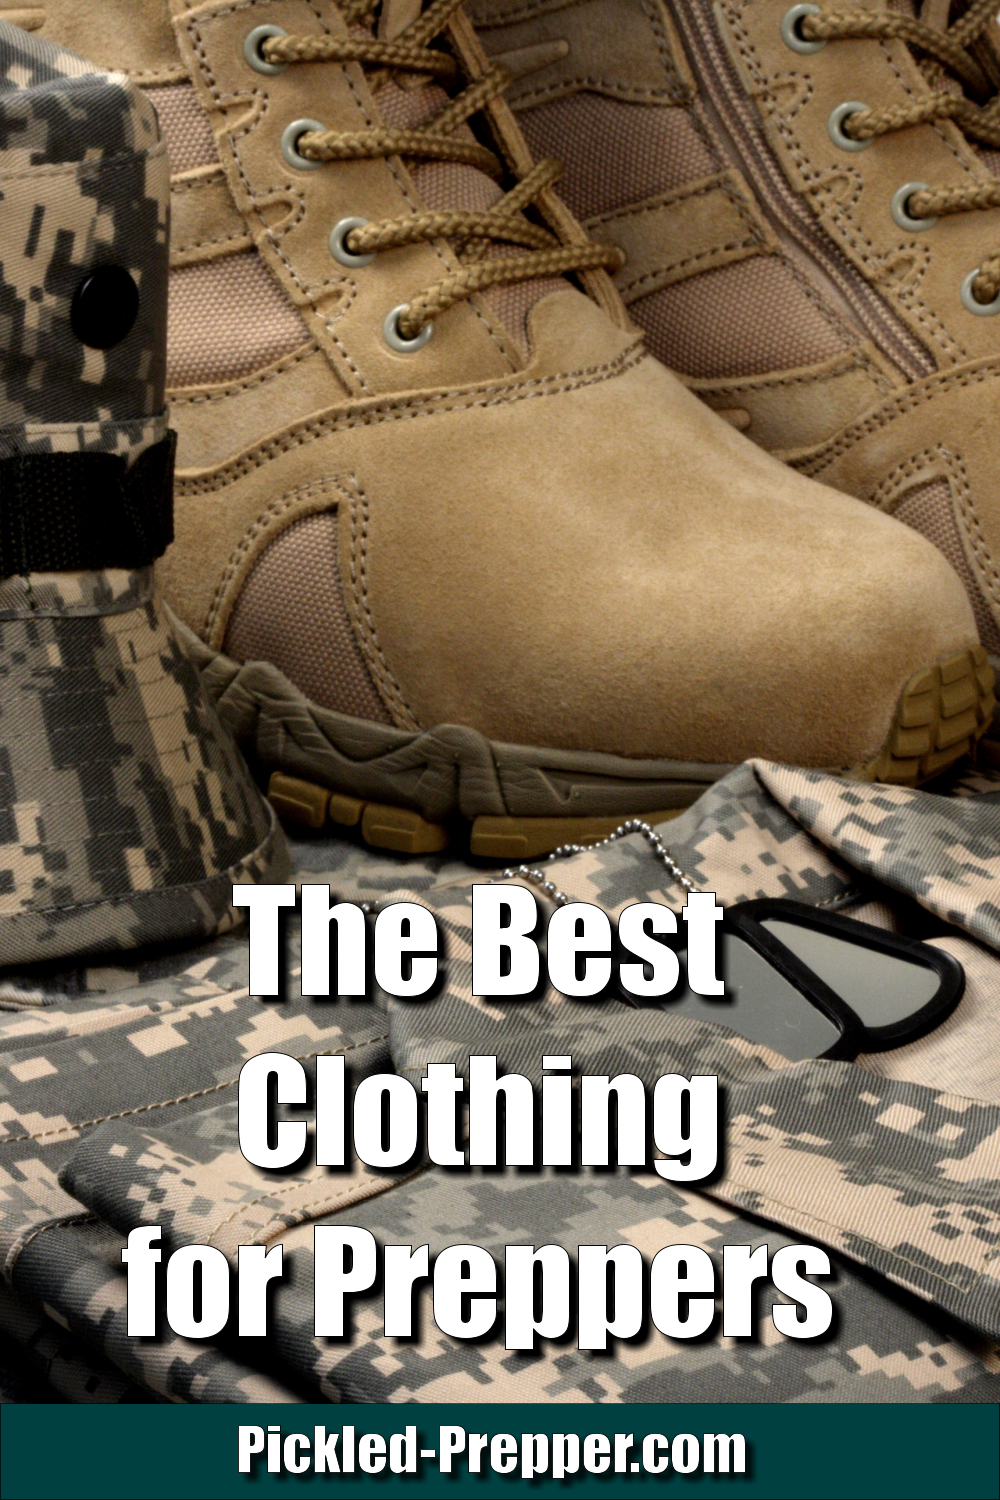 October 3: The Best Clothing for Preppers